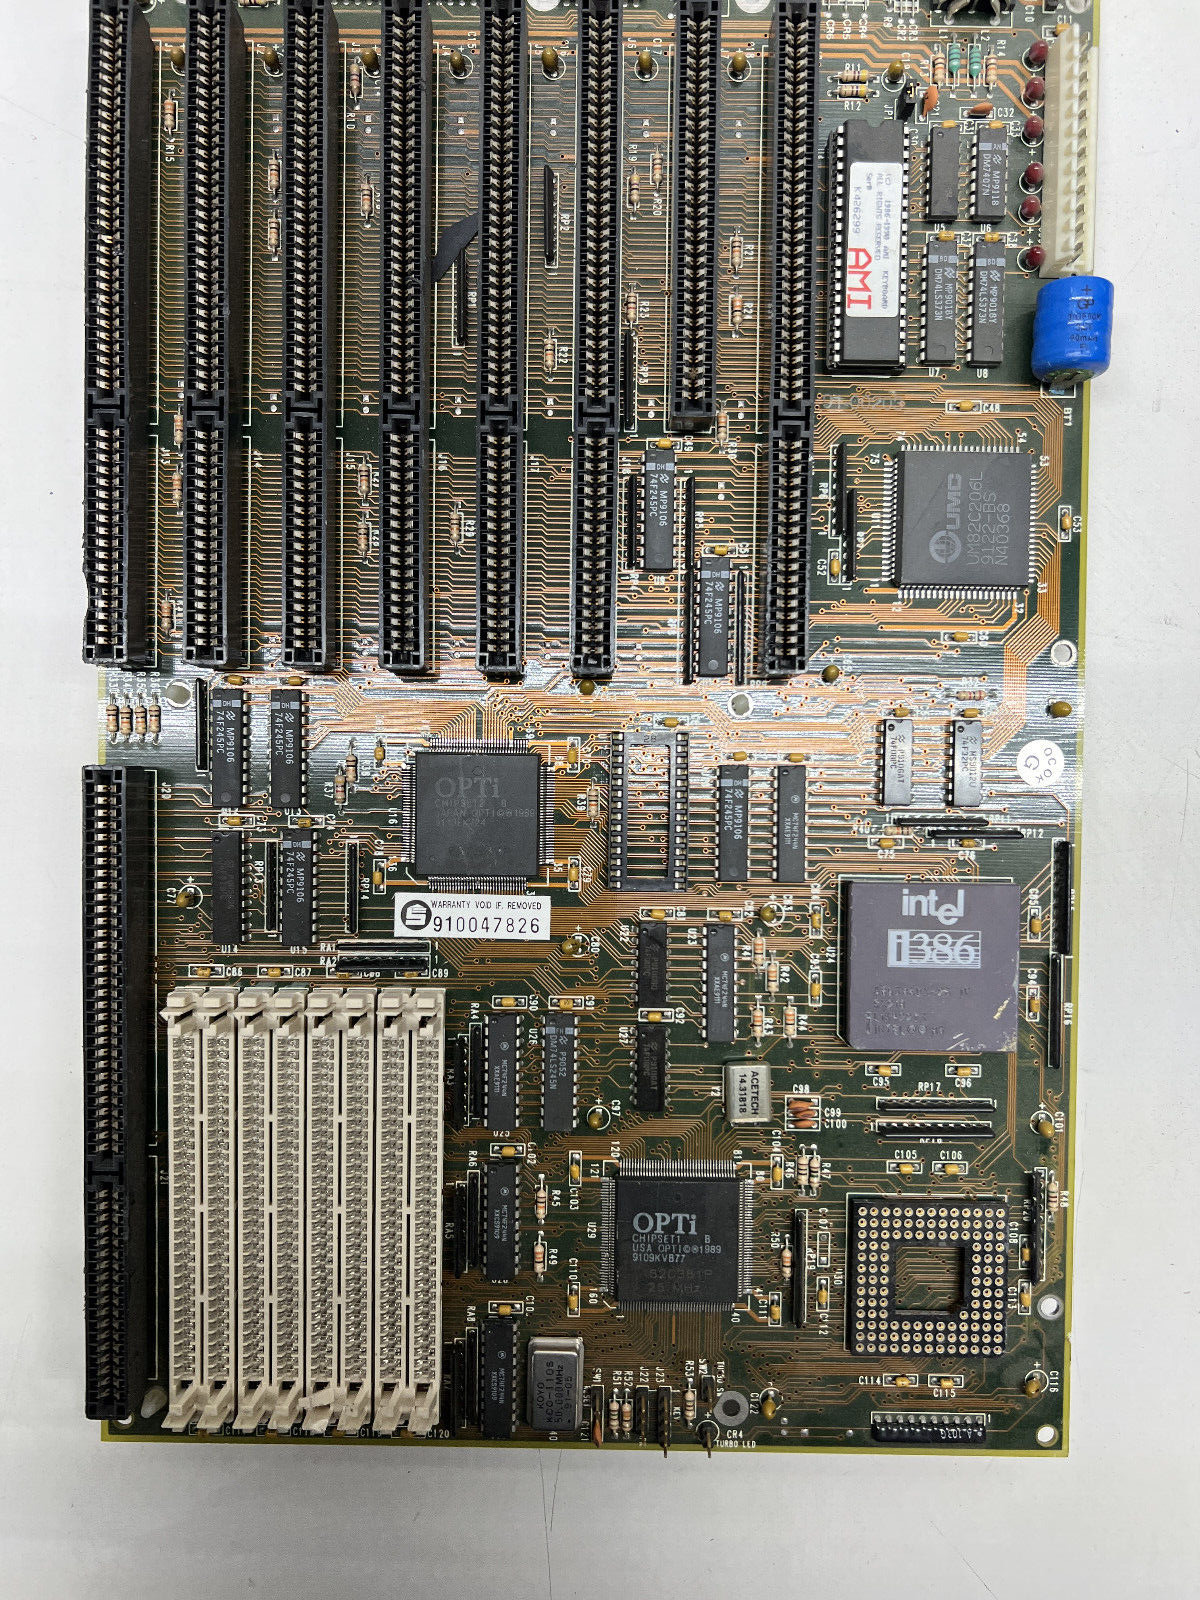 Vintage Motherboard 386, with Intel i386 AMI OPTI chipset